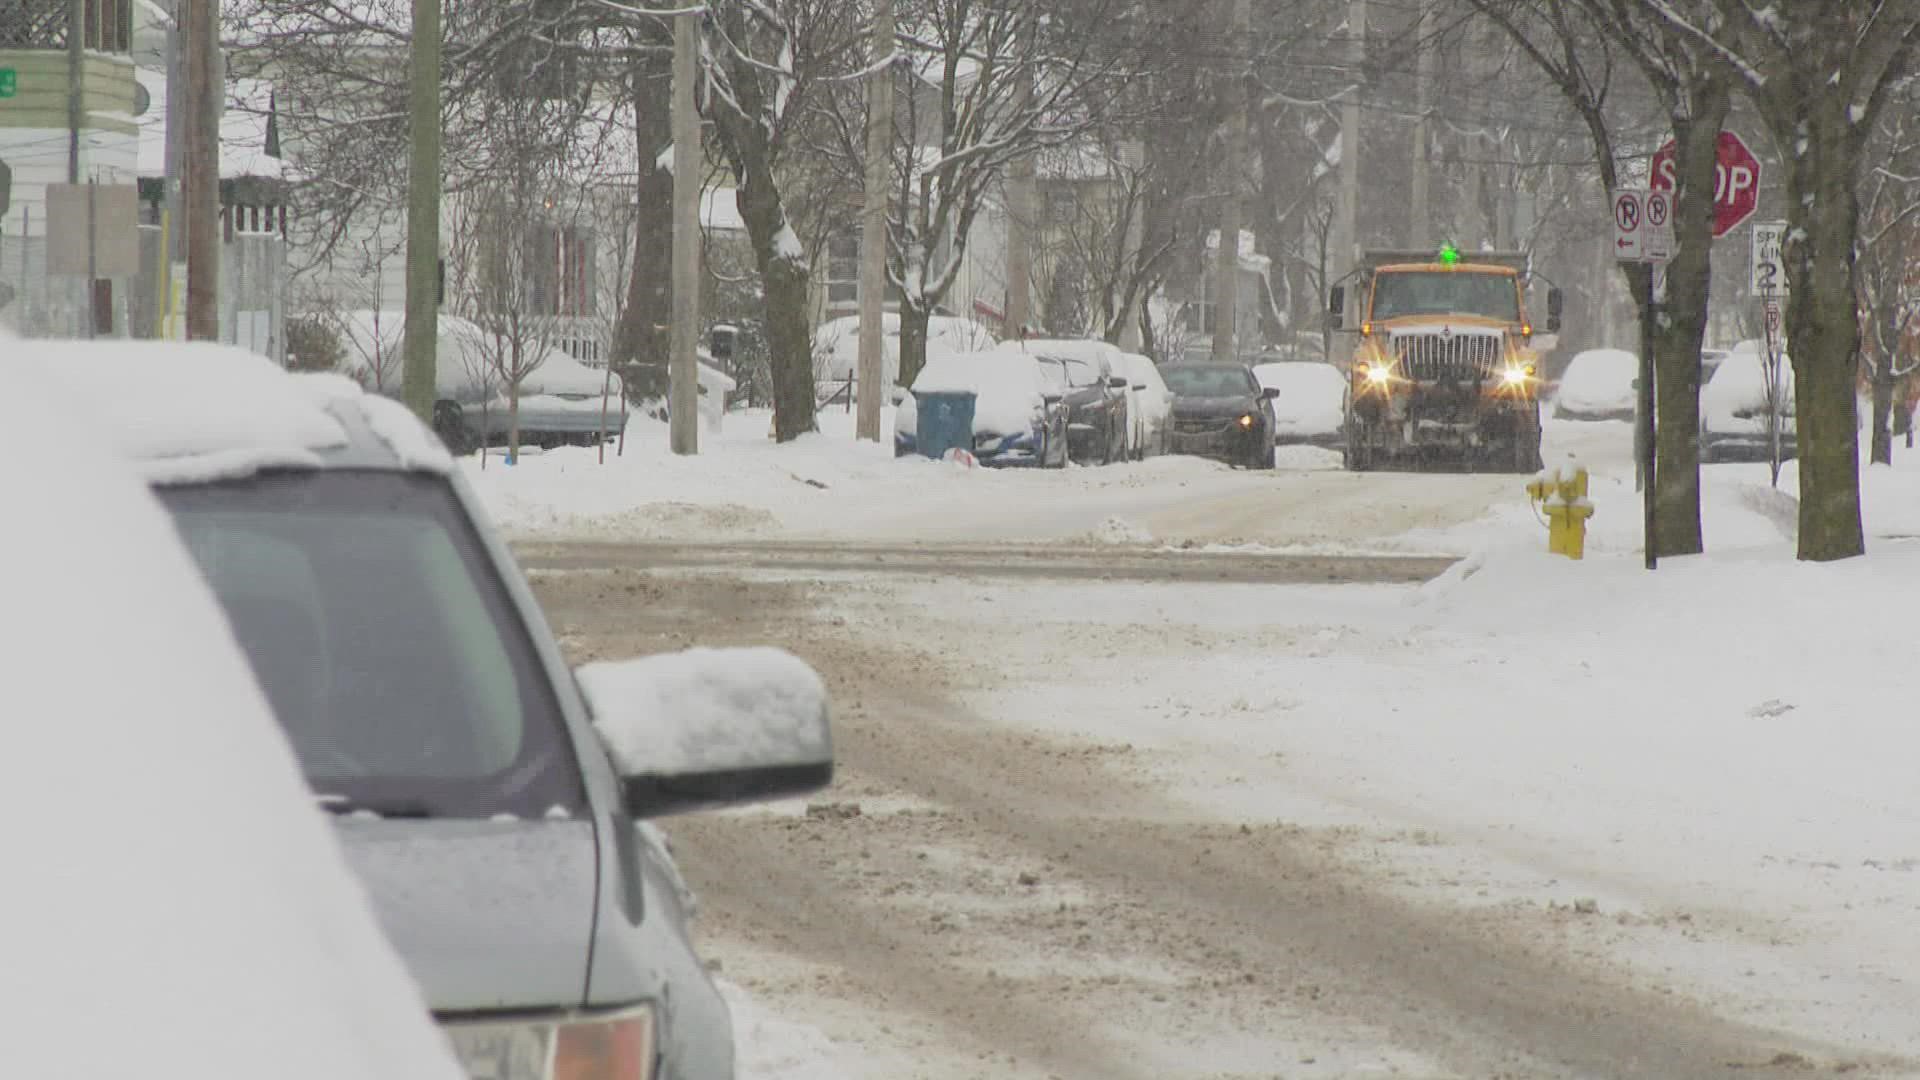 Grand Rapids' odd-even parking city ordinance is in effect. This is so snow plows can clear all secondary streets.